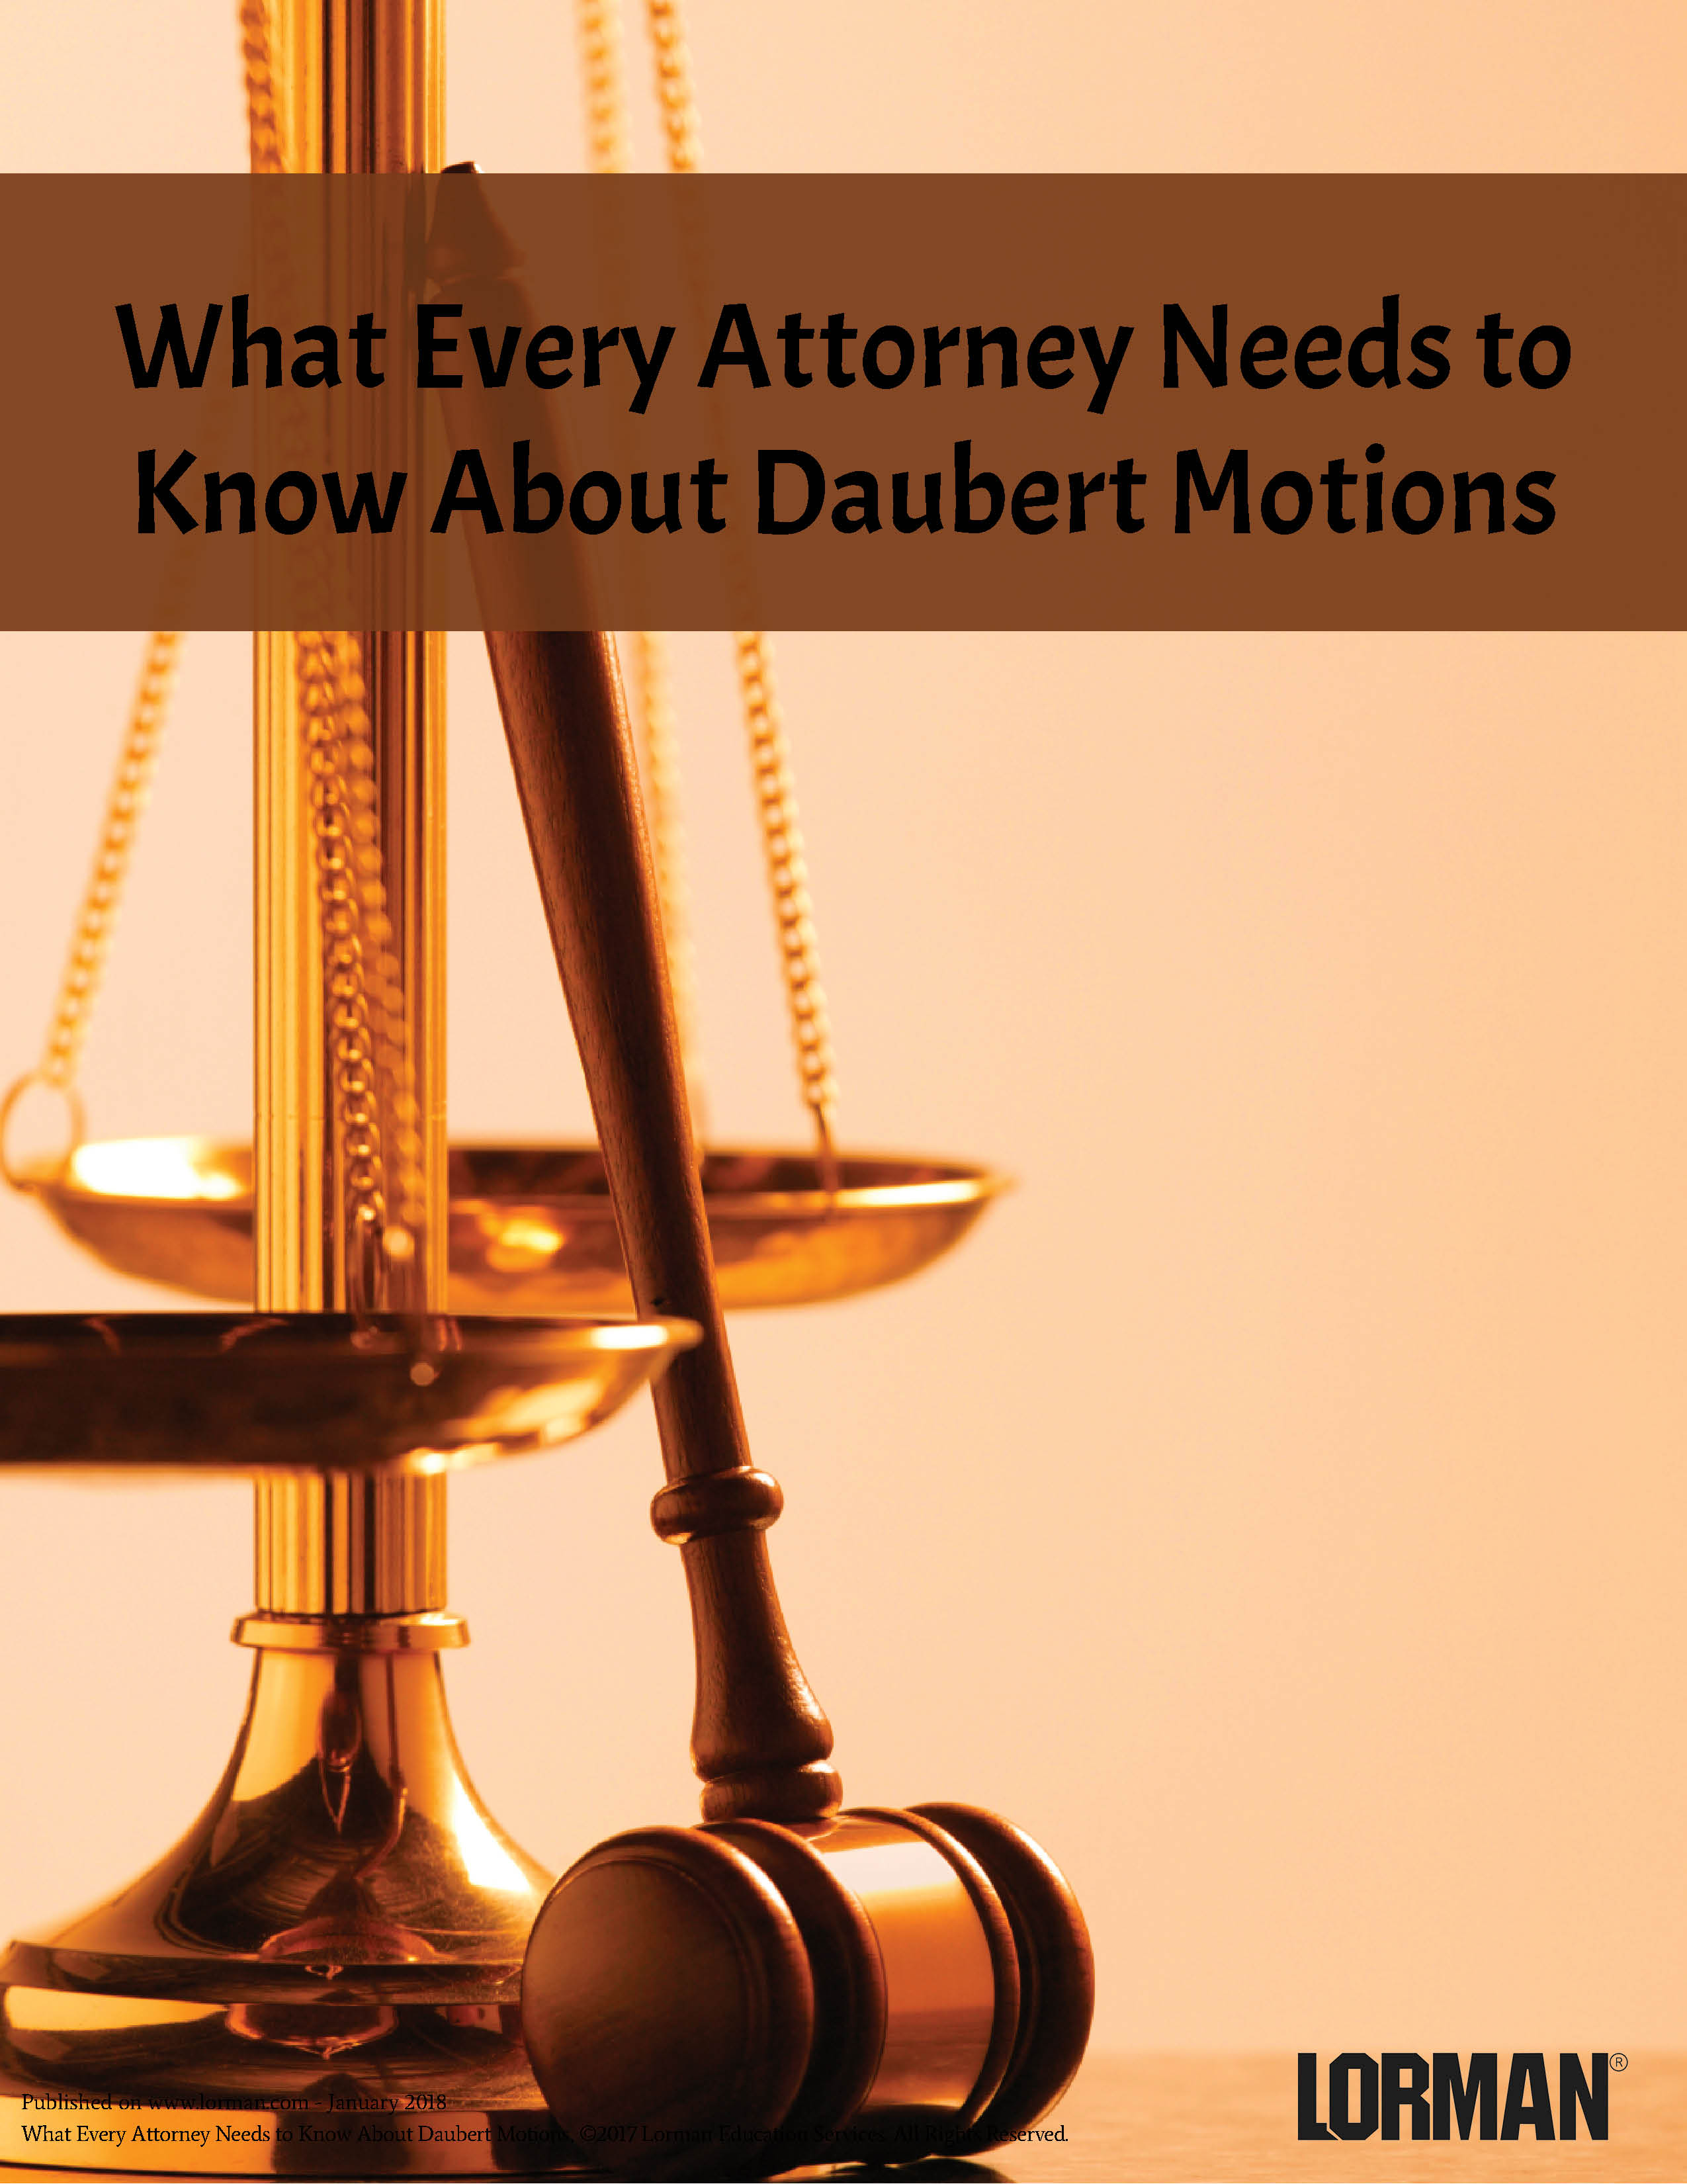 What Every Attorney Needs to Know About Daubert Motions